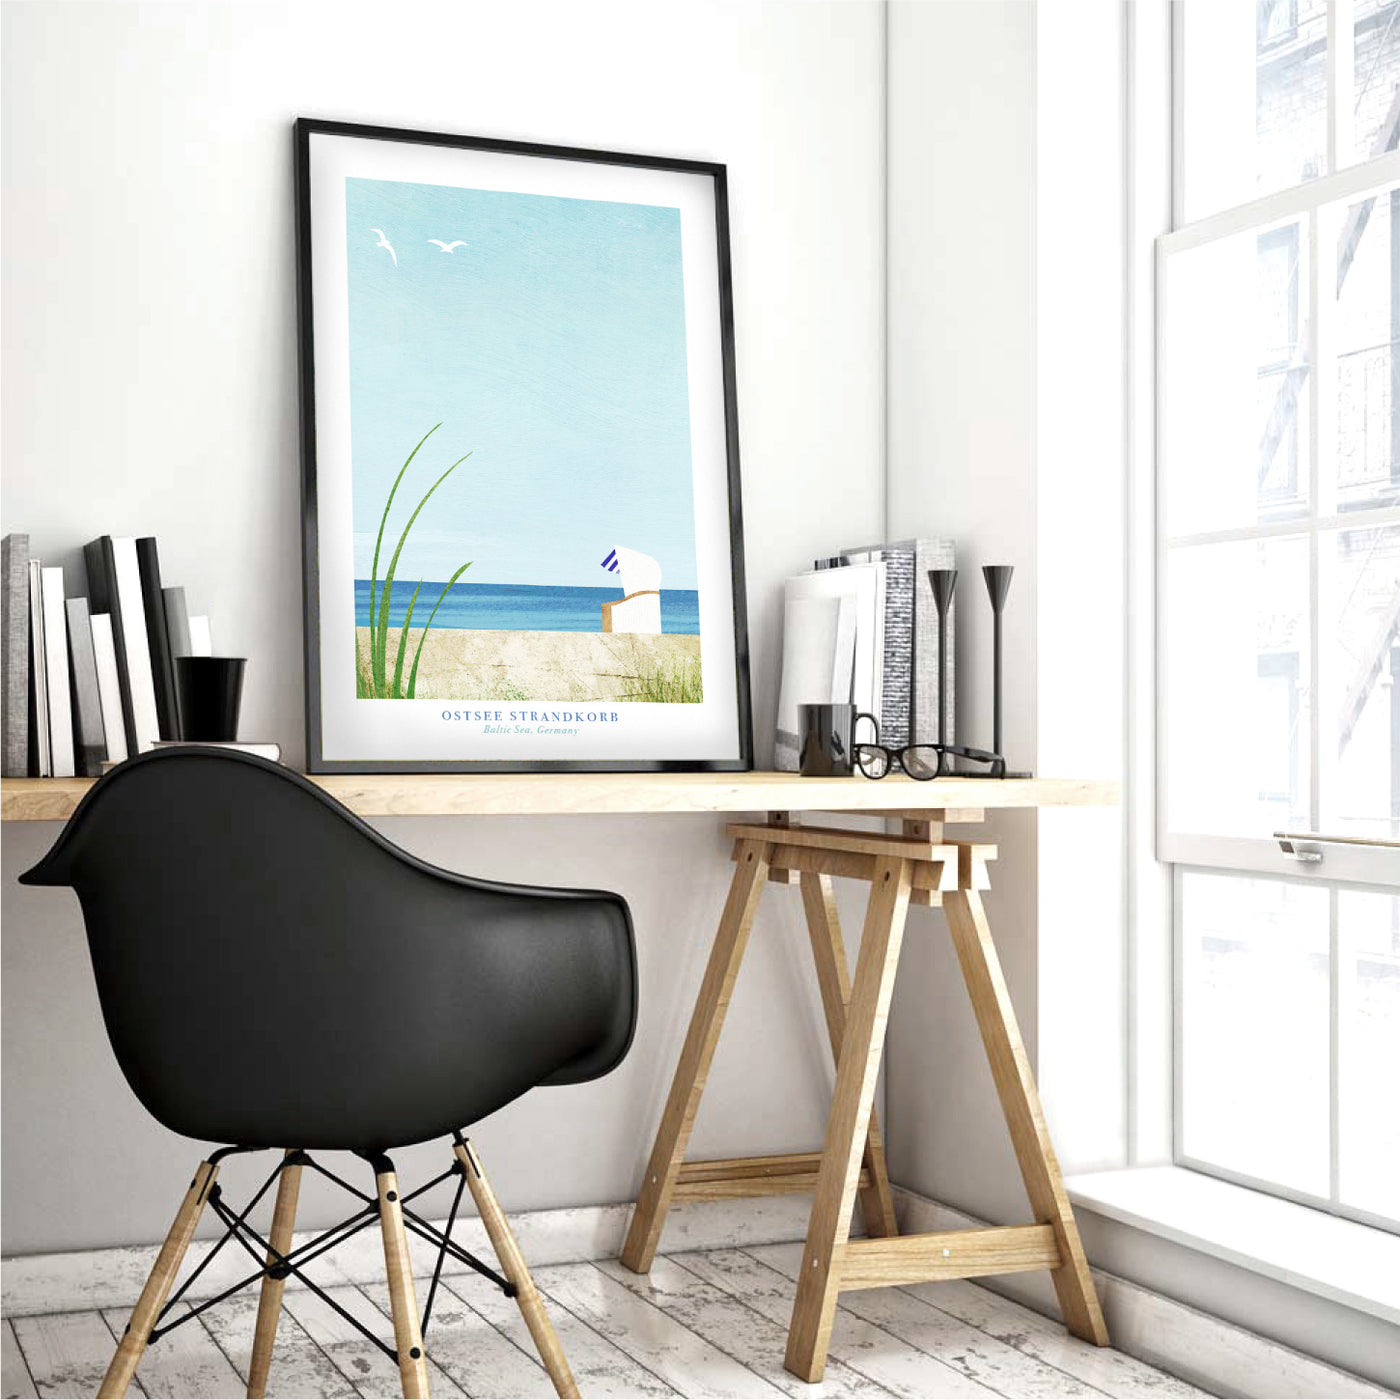 Ostsee Strandkorb Illustration - Art Print by Henry Rivers, Poster, Stretched Canvas or Framed Wall Art Prints, shown framed in a room